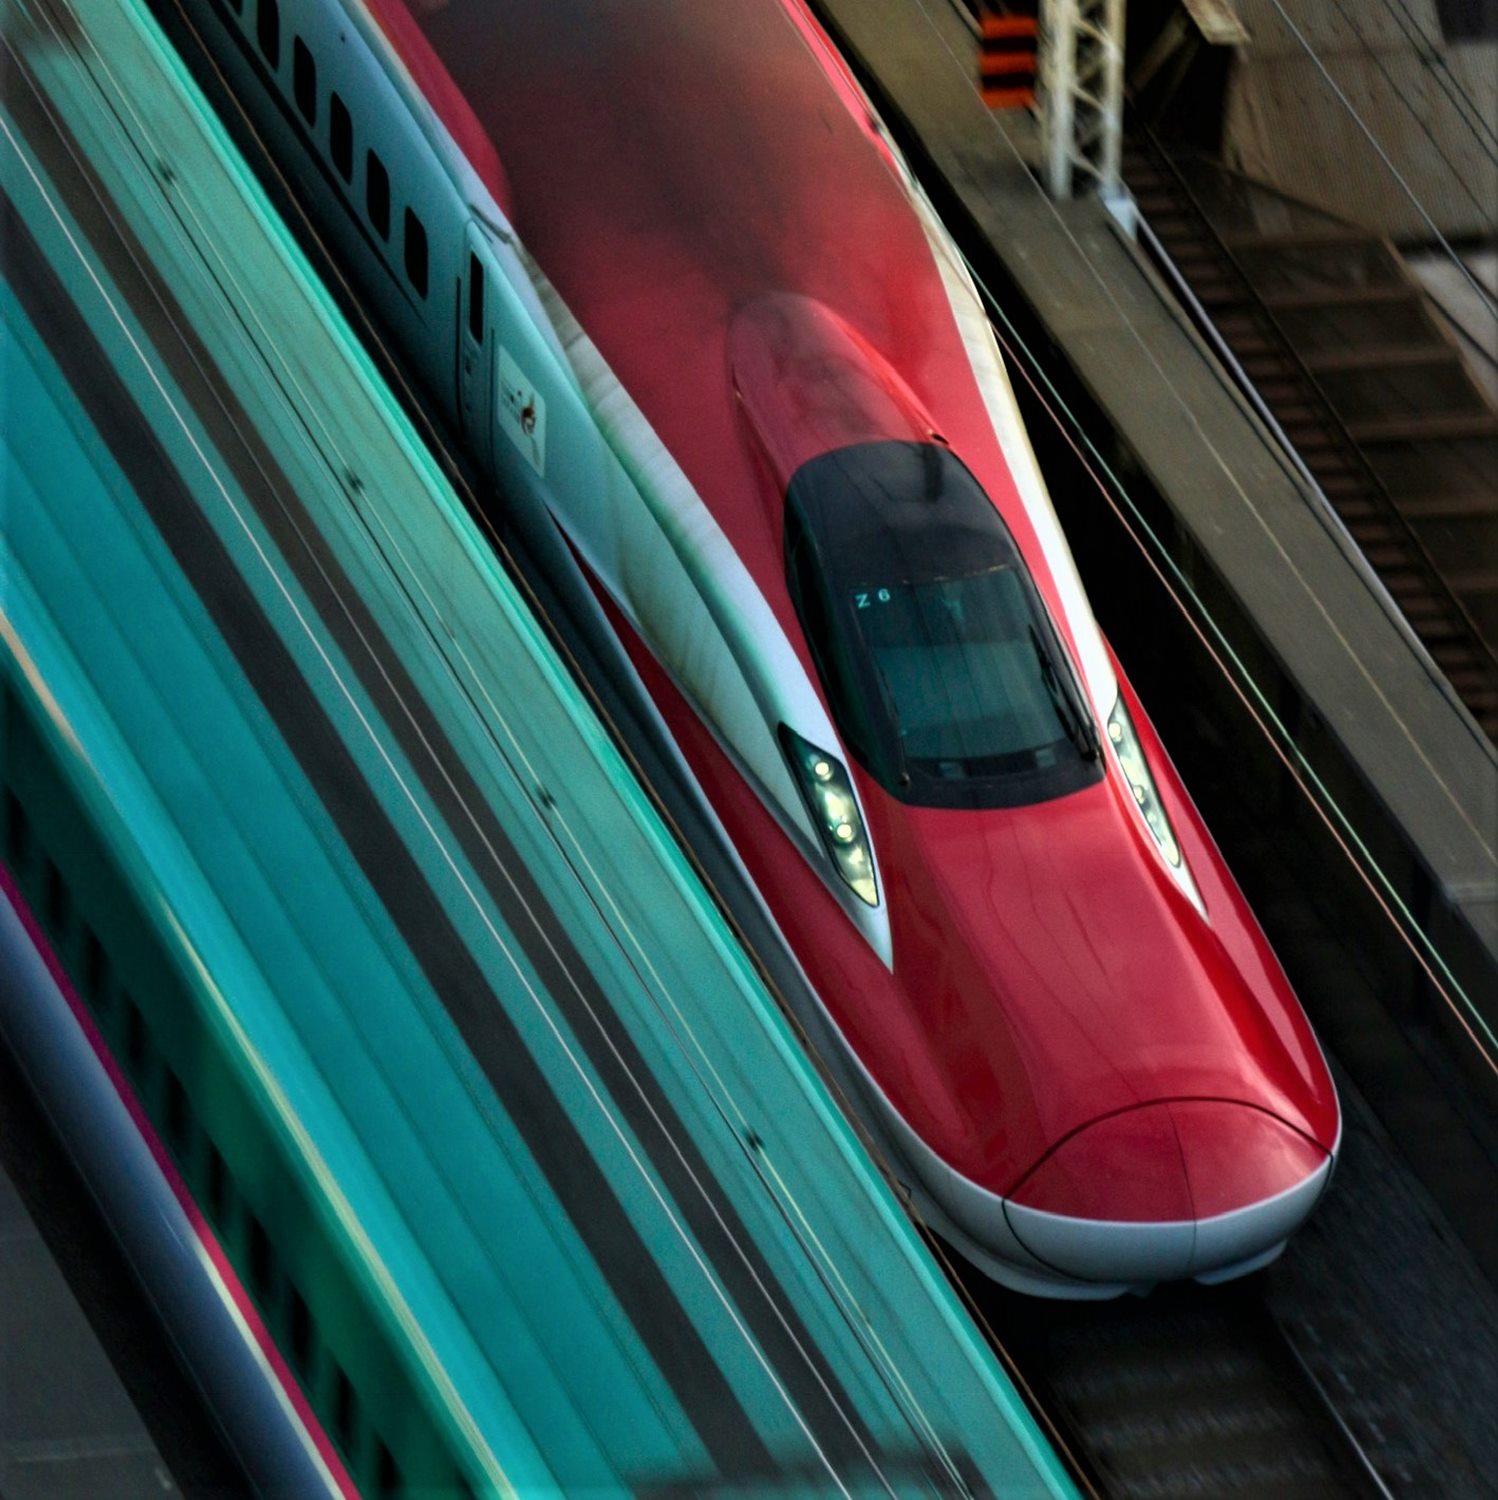 The Shinkansen connects various parts of Japan in accurate time 2